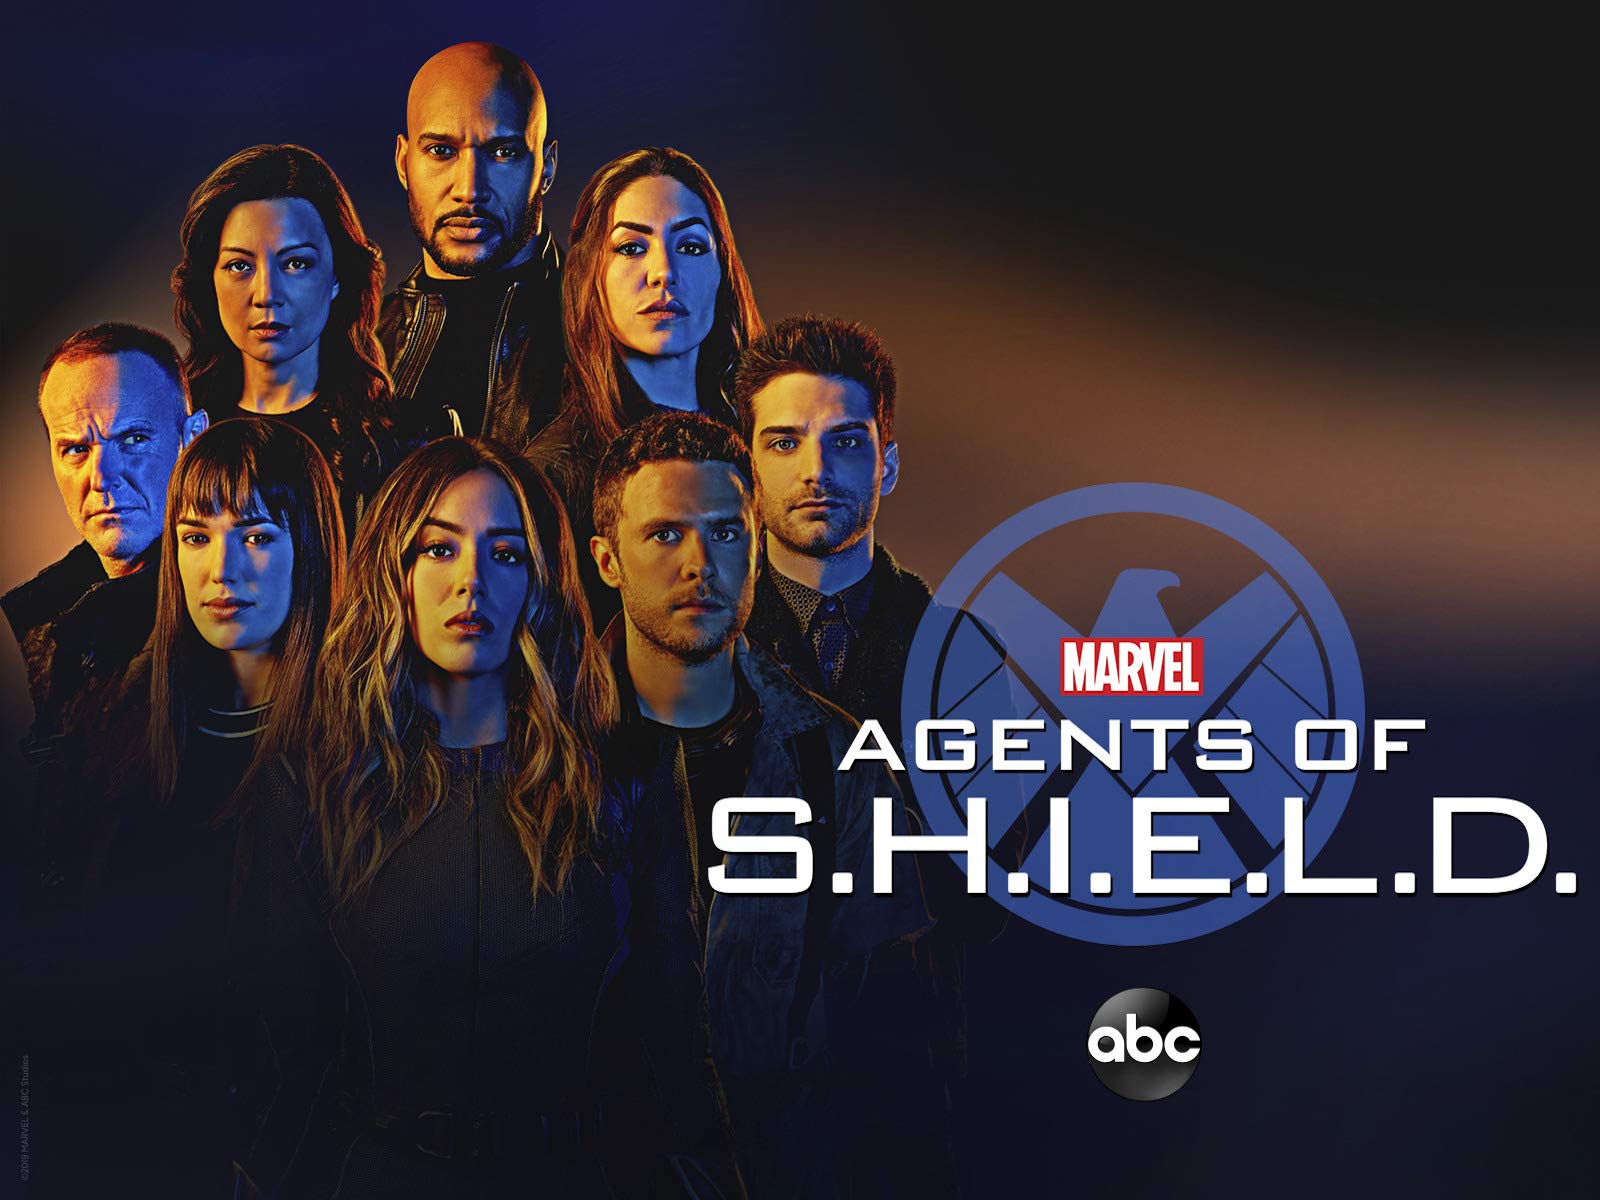 Agents of Shield Wallpaper phone by Sidhrat on DeviantArt